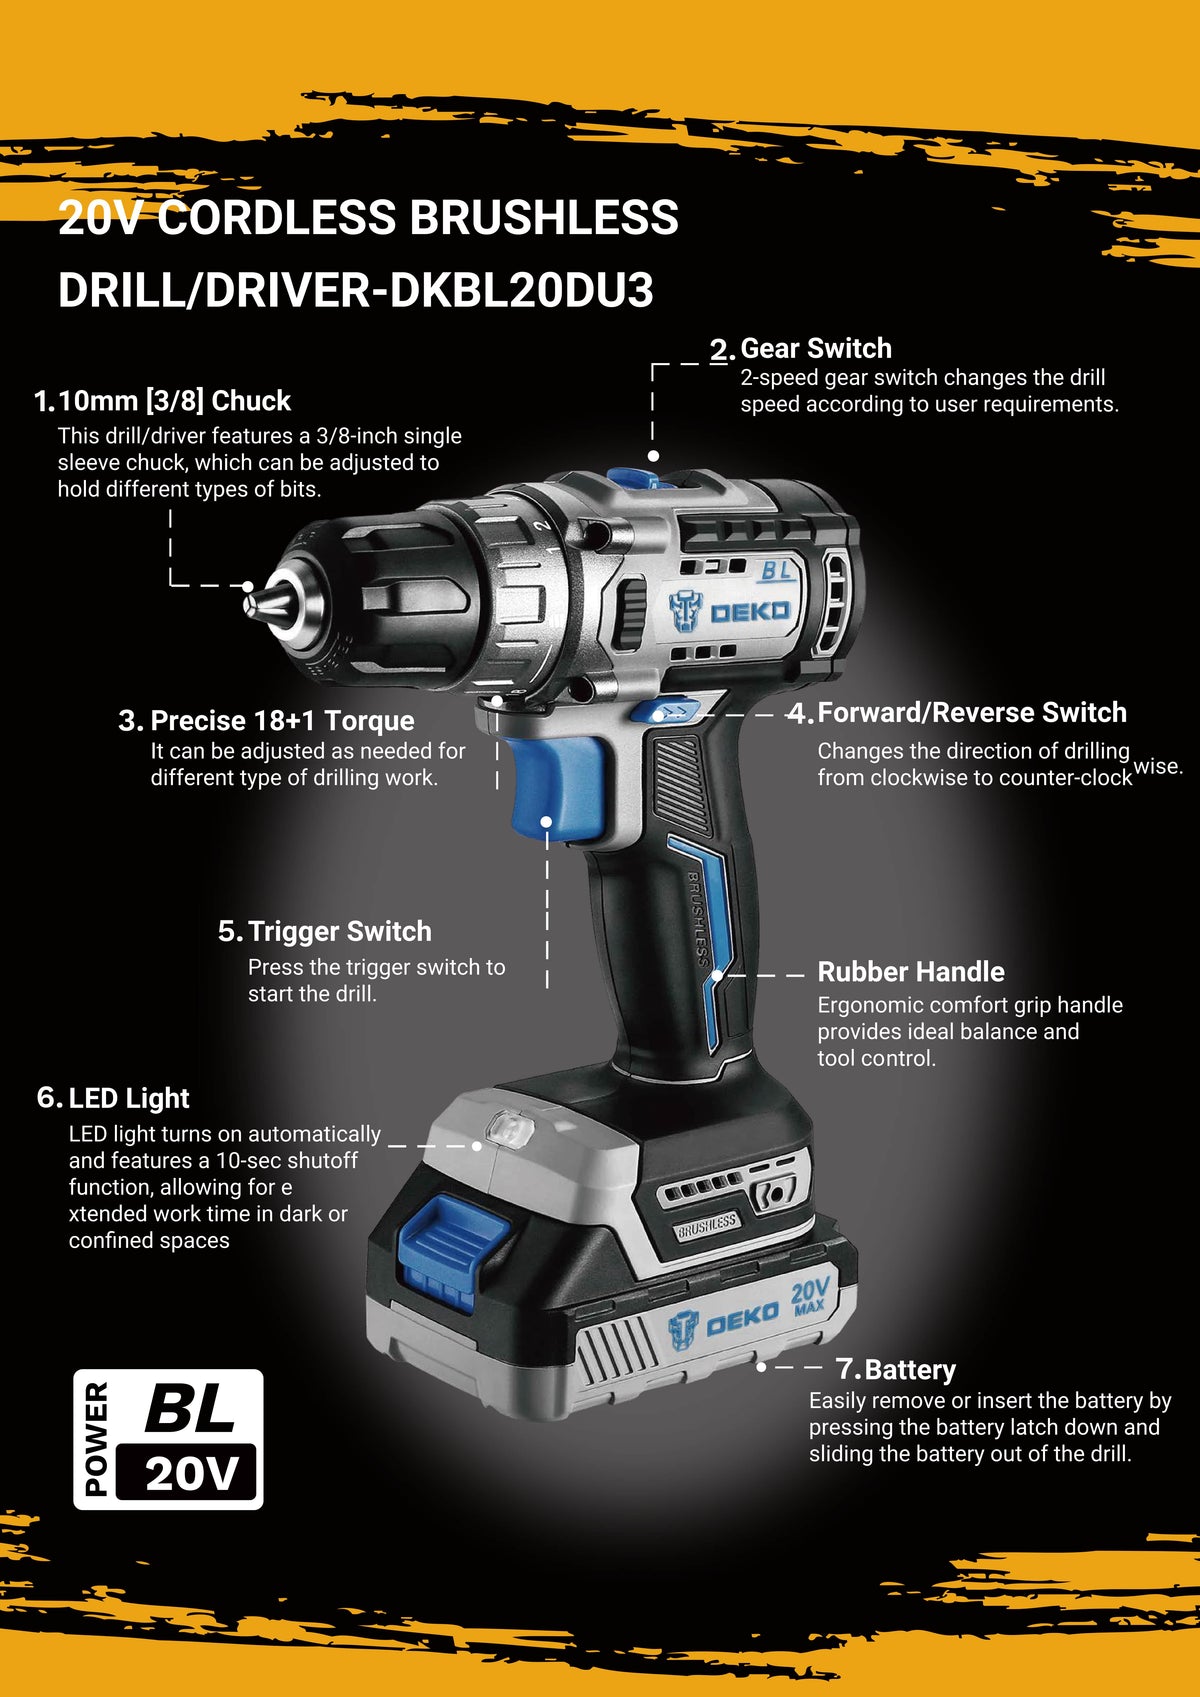 20V DXBL Cordless Drill introduction of power tool supplier DEKO